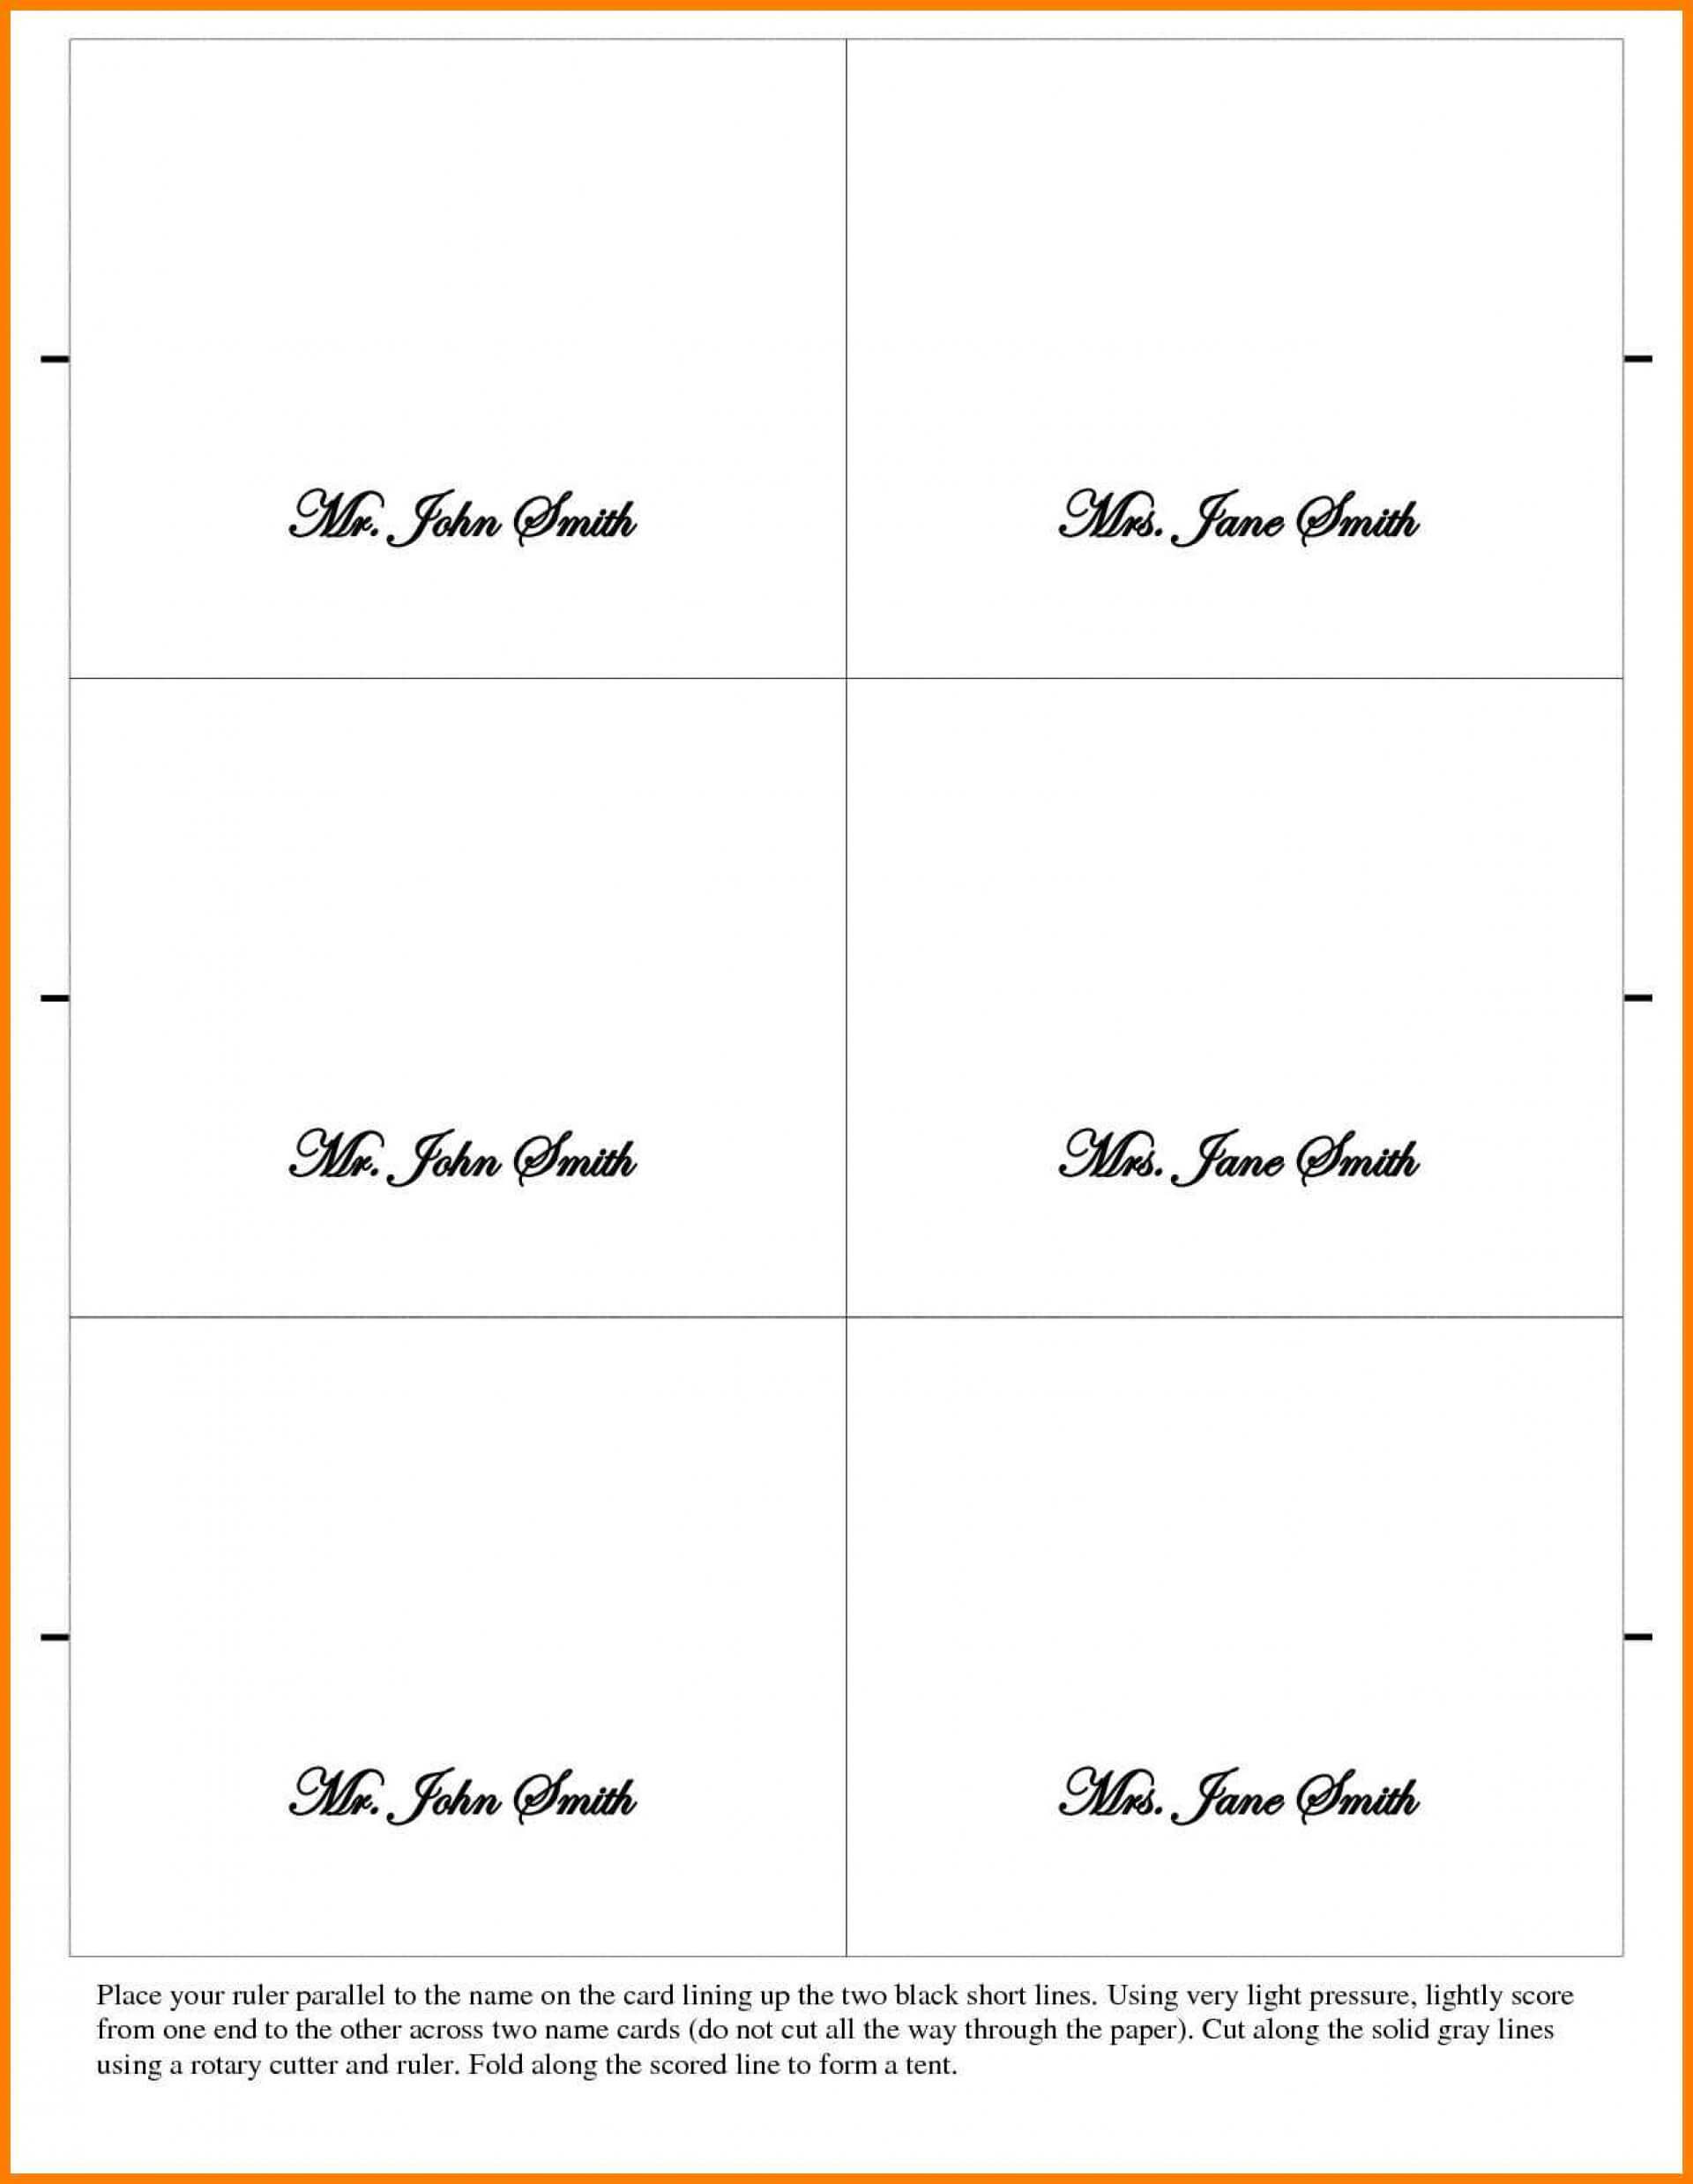 033 Place Card Template Word Flat 1024X1024V1462918202 With Regard To Imprintable Place Cards Template